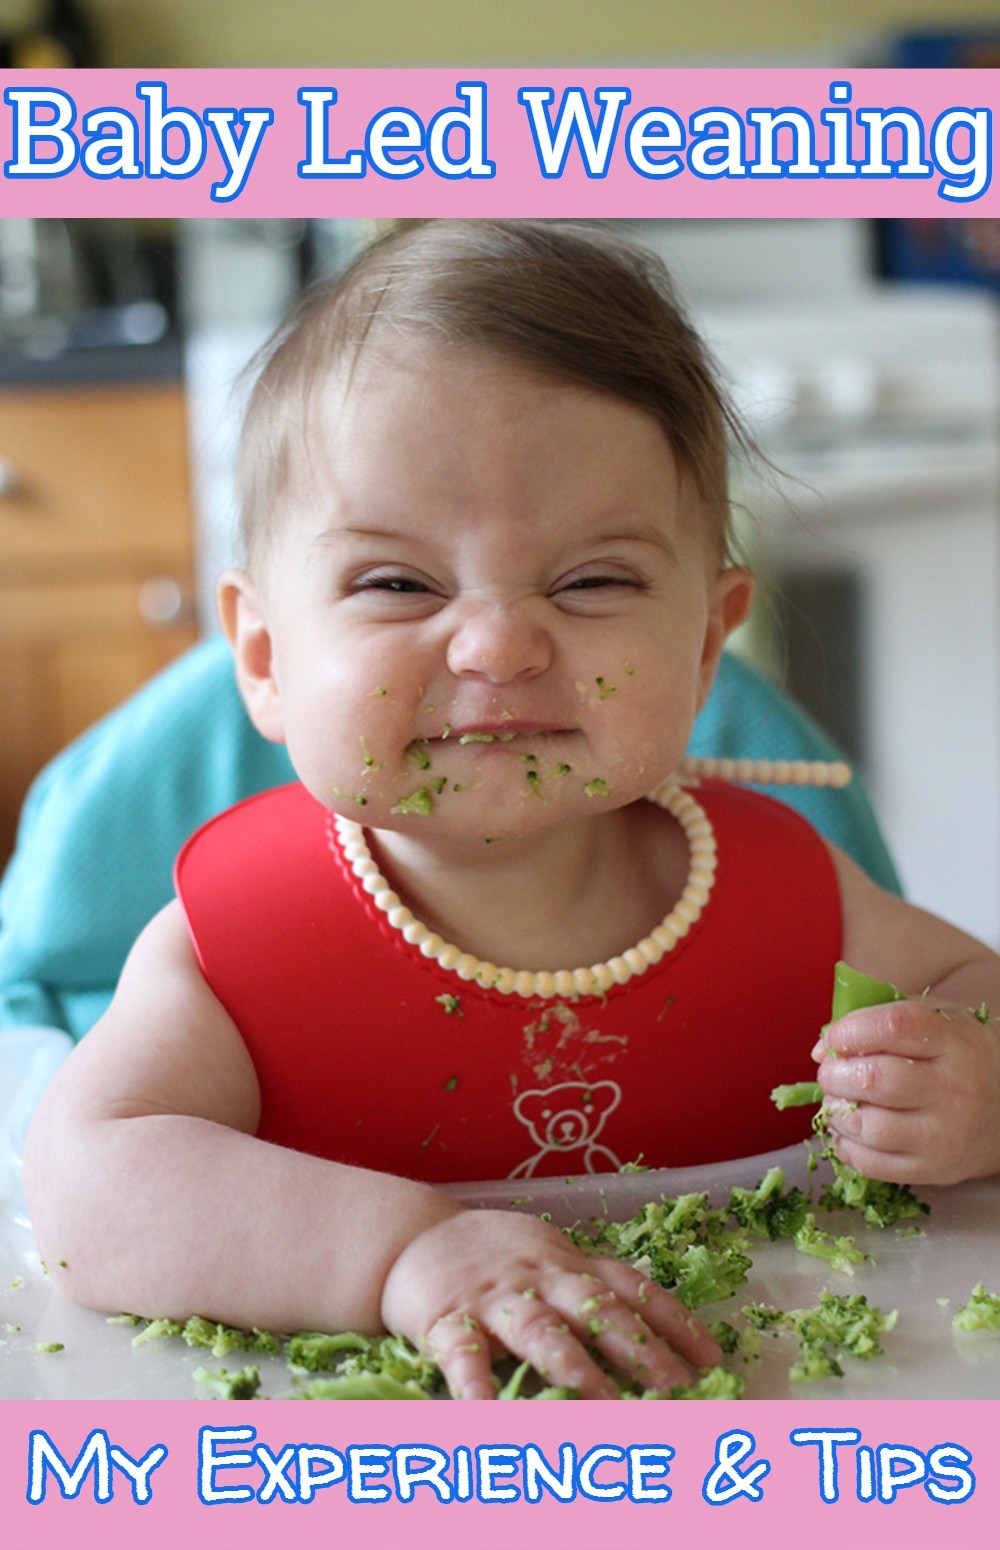 Are you starting baby led weaning? Introducing solid foods and need some tips?